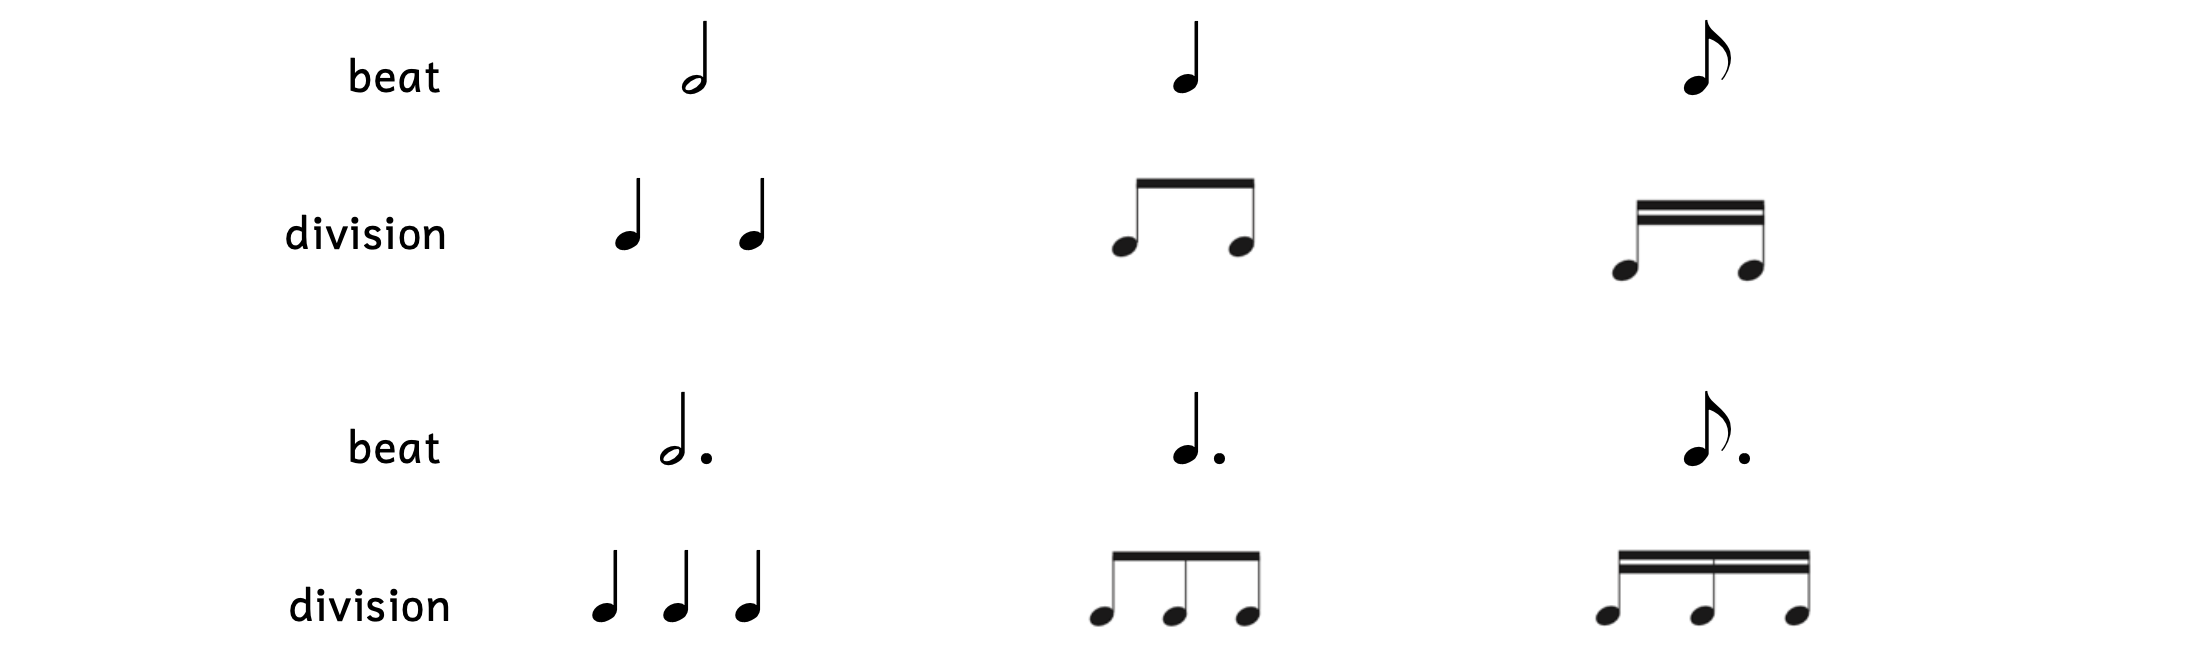 If the half note equals one beat, the division is two quarter notes. If the quarter note equals one beat, the division is two eighth notes. If the eighth note equals one beat, the division is two sixteenth notes. If the dotted half note equals a beat, the division is three quarter notes. If the dotted quarter note is worth one beat, the division is three eighth notes. If the dotted eighth note is worth one beat, the division is three sixteenth notes.